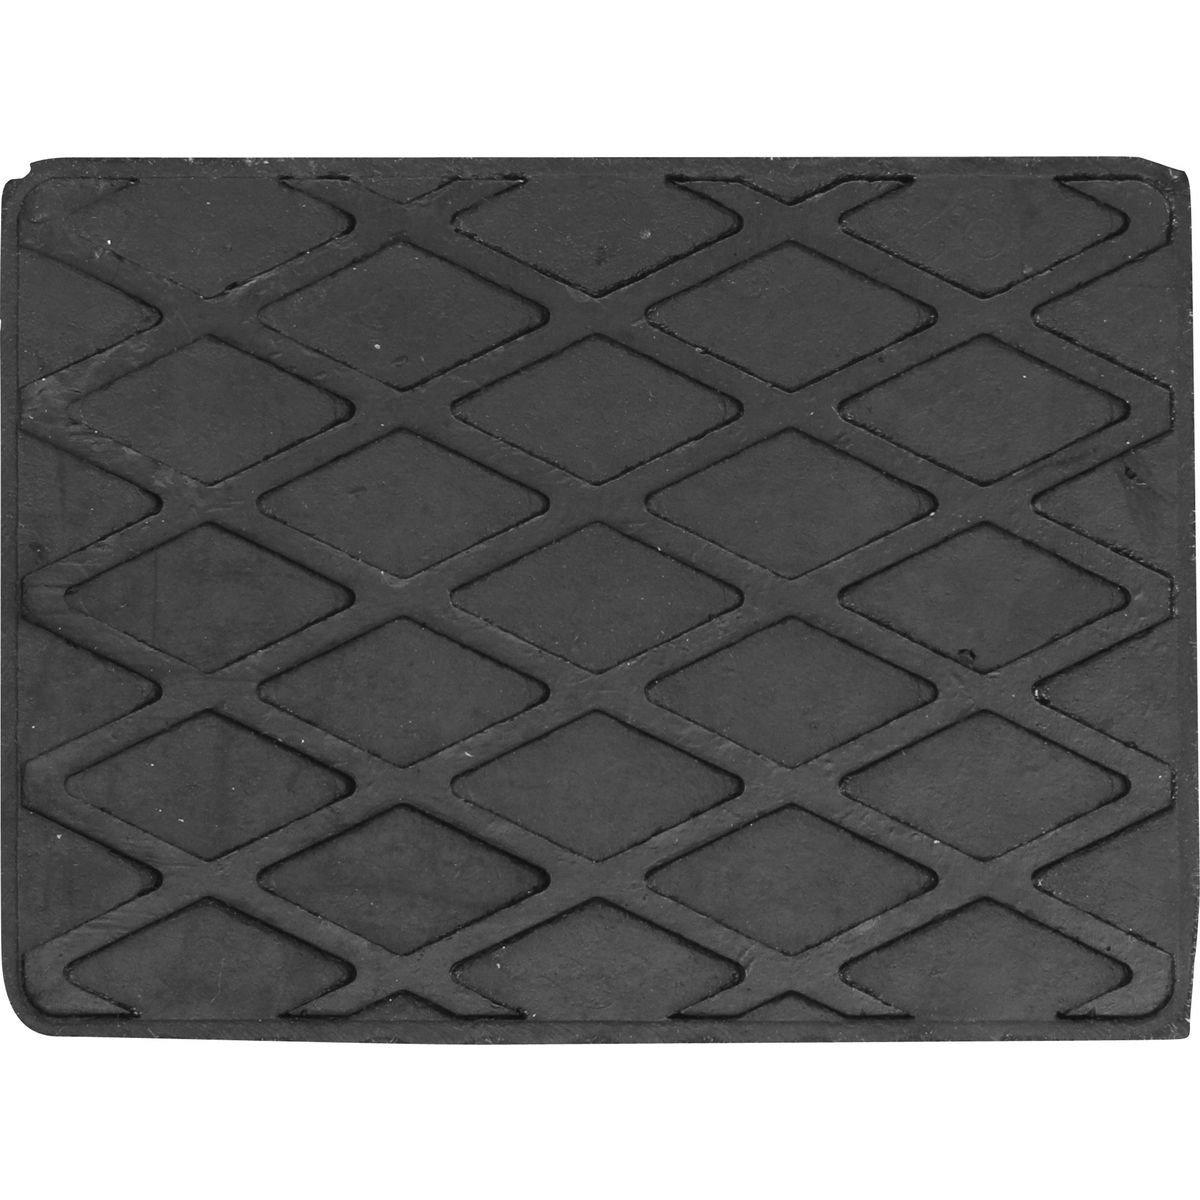 Rubber Pad | for Auto Lifts | 160 x 120 x 115 mm